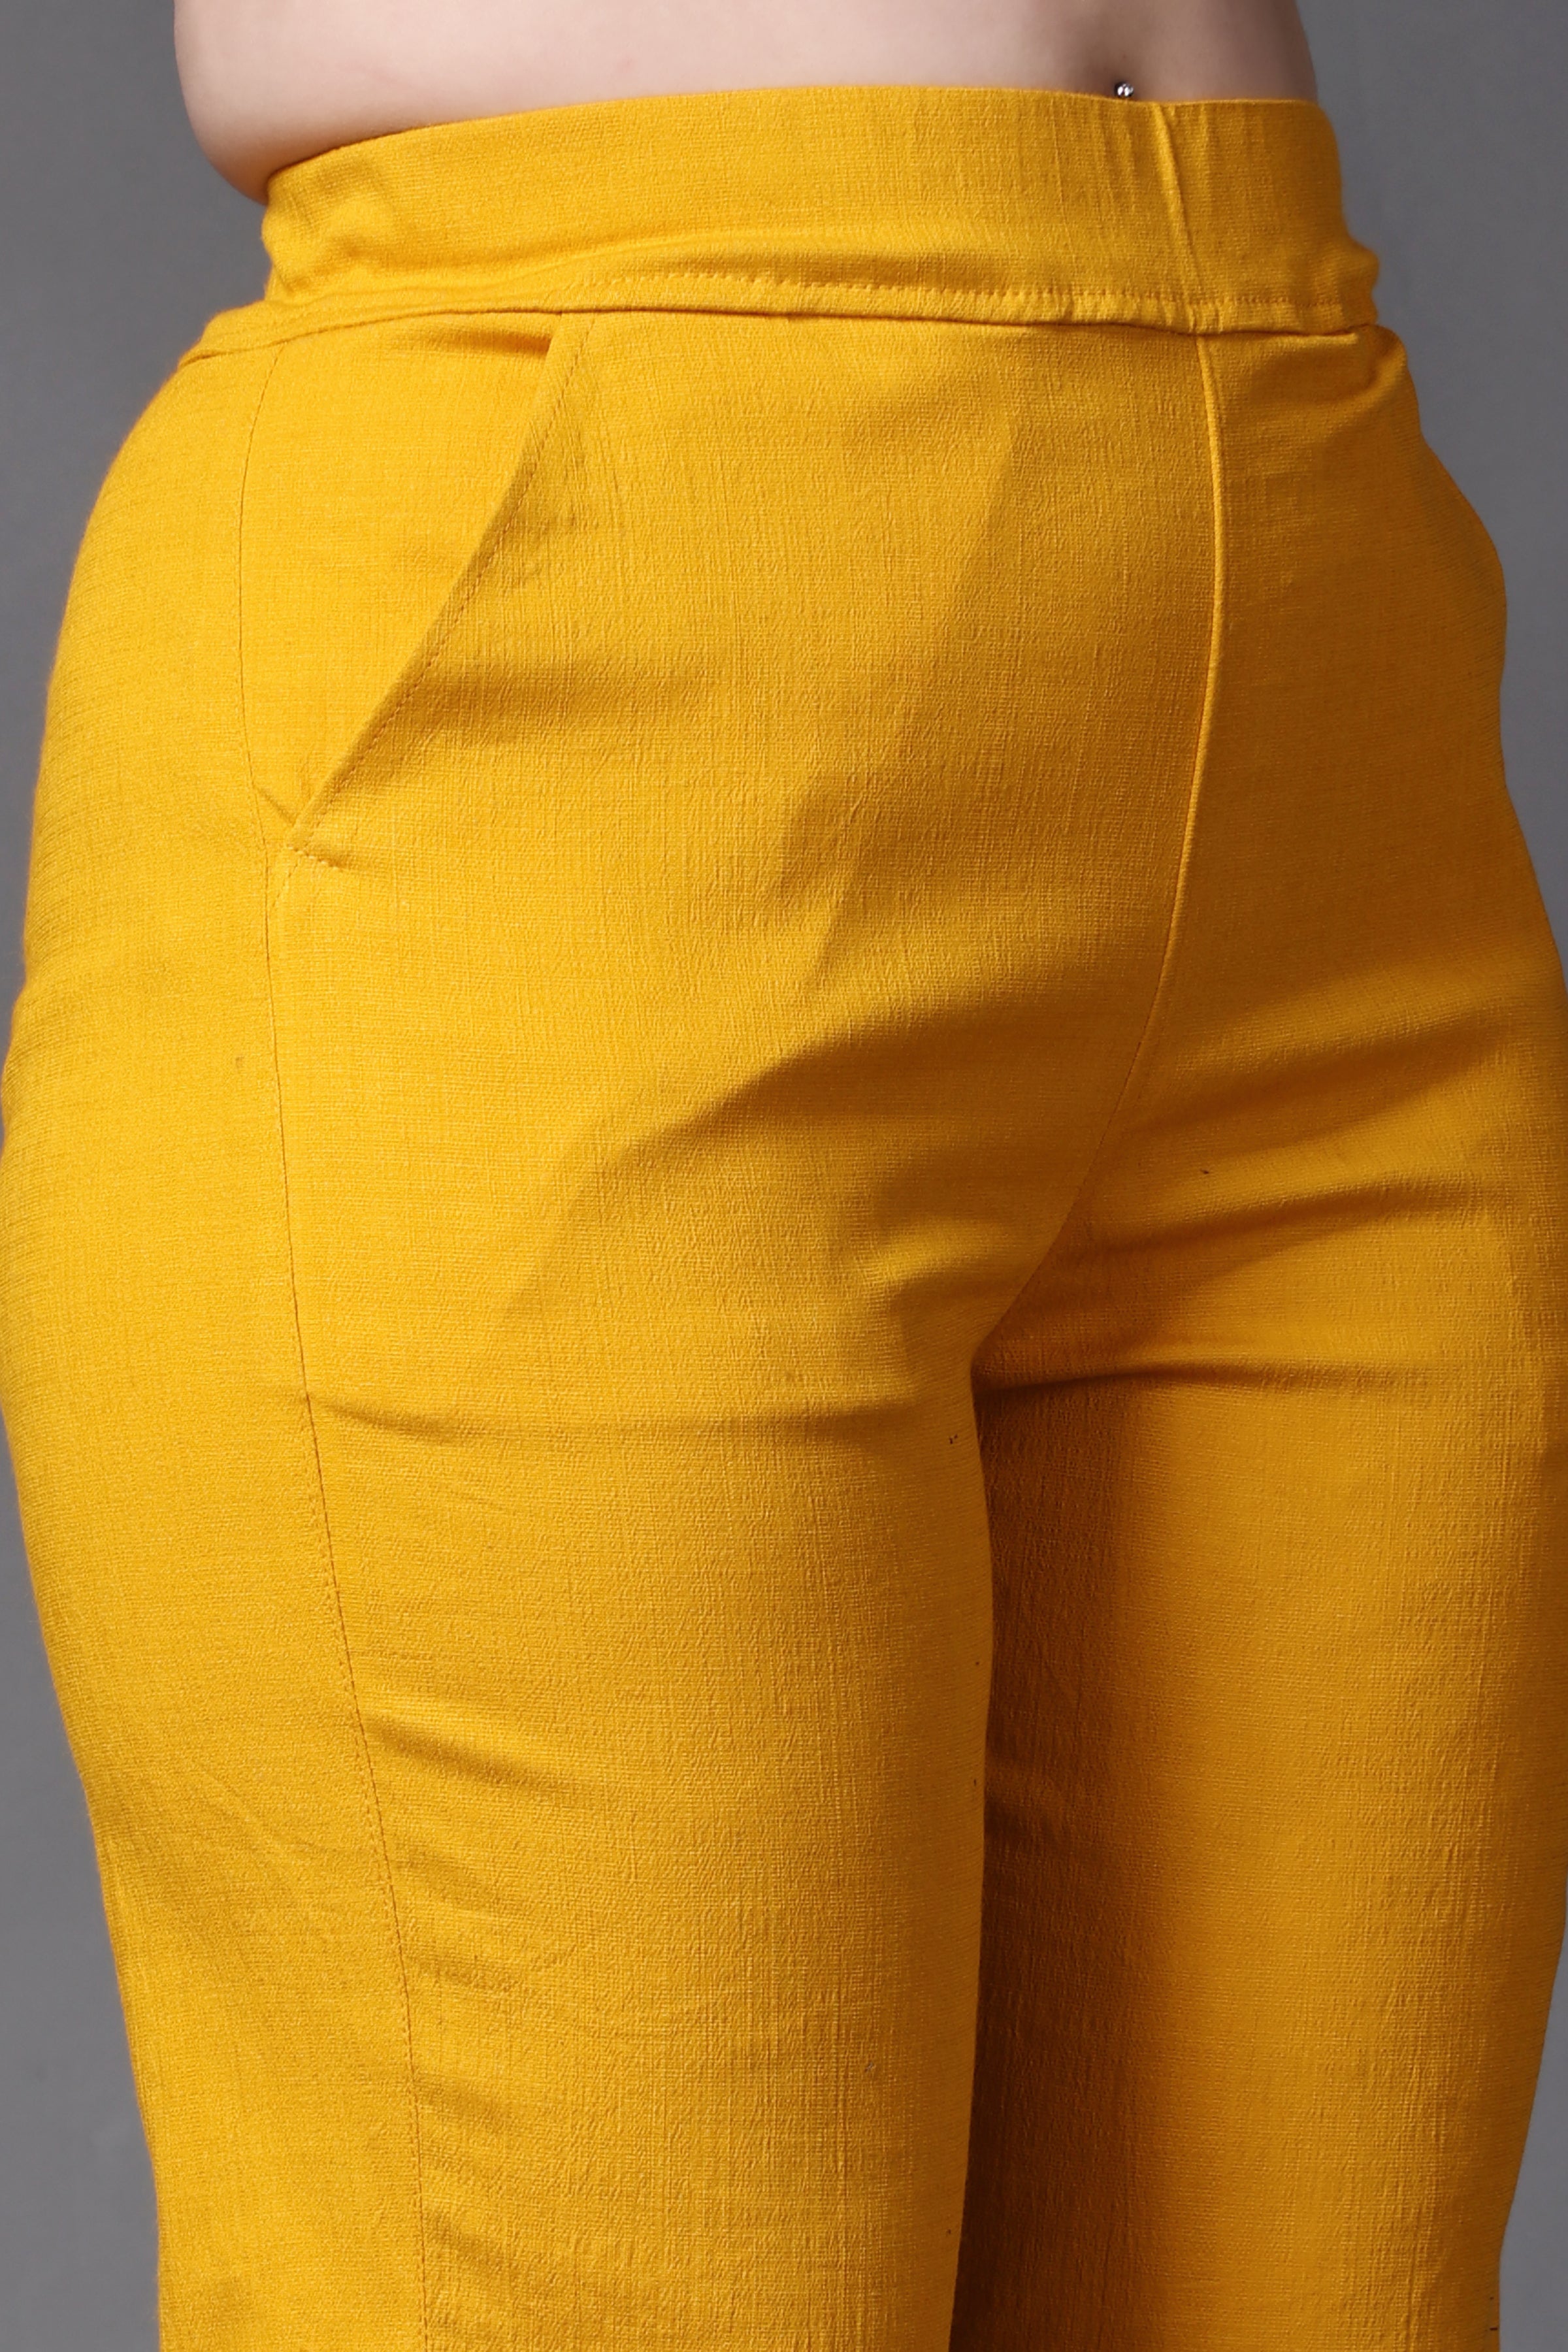 Pants ONLY Mustard Yellow Pants, High Waist Regular Fit Pants for Women,  Yellow Classic Pants for Women, Office Pants Womens - Etsy